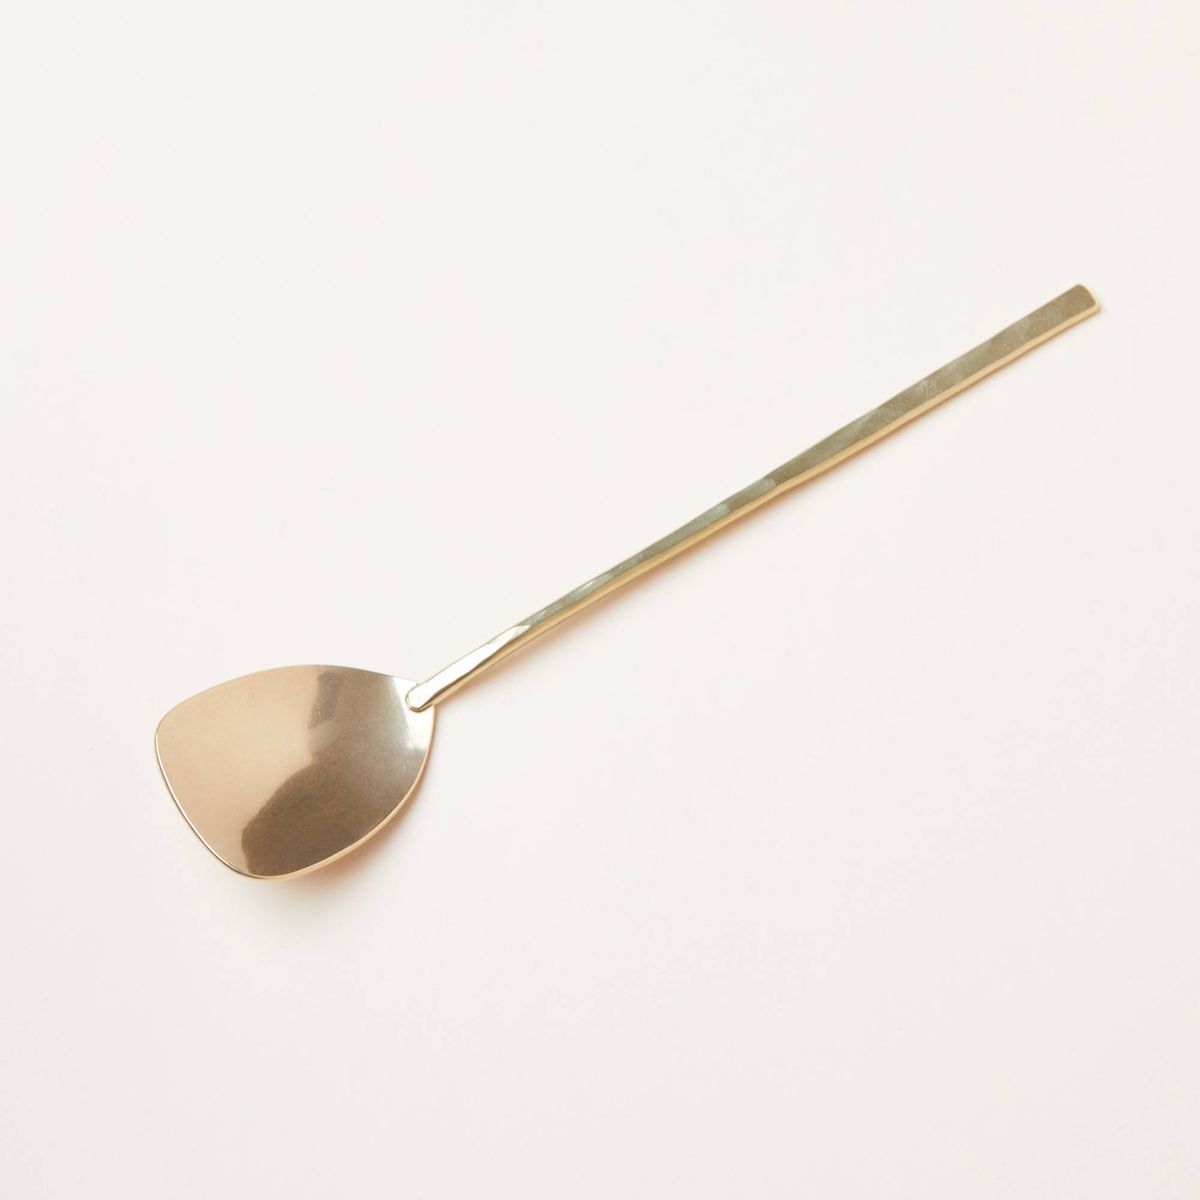 A long-handled brass spoon that is squared-off at the end